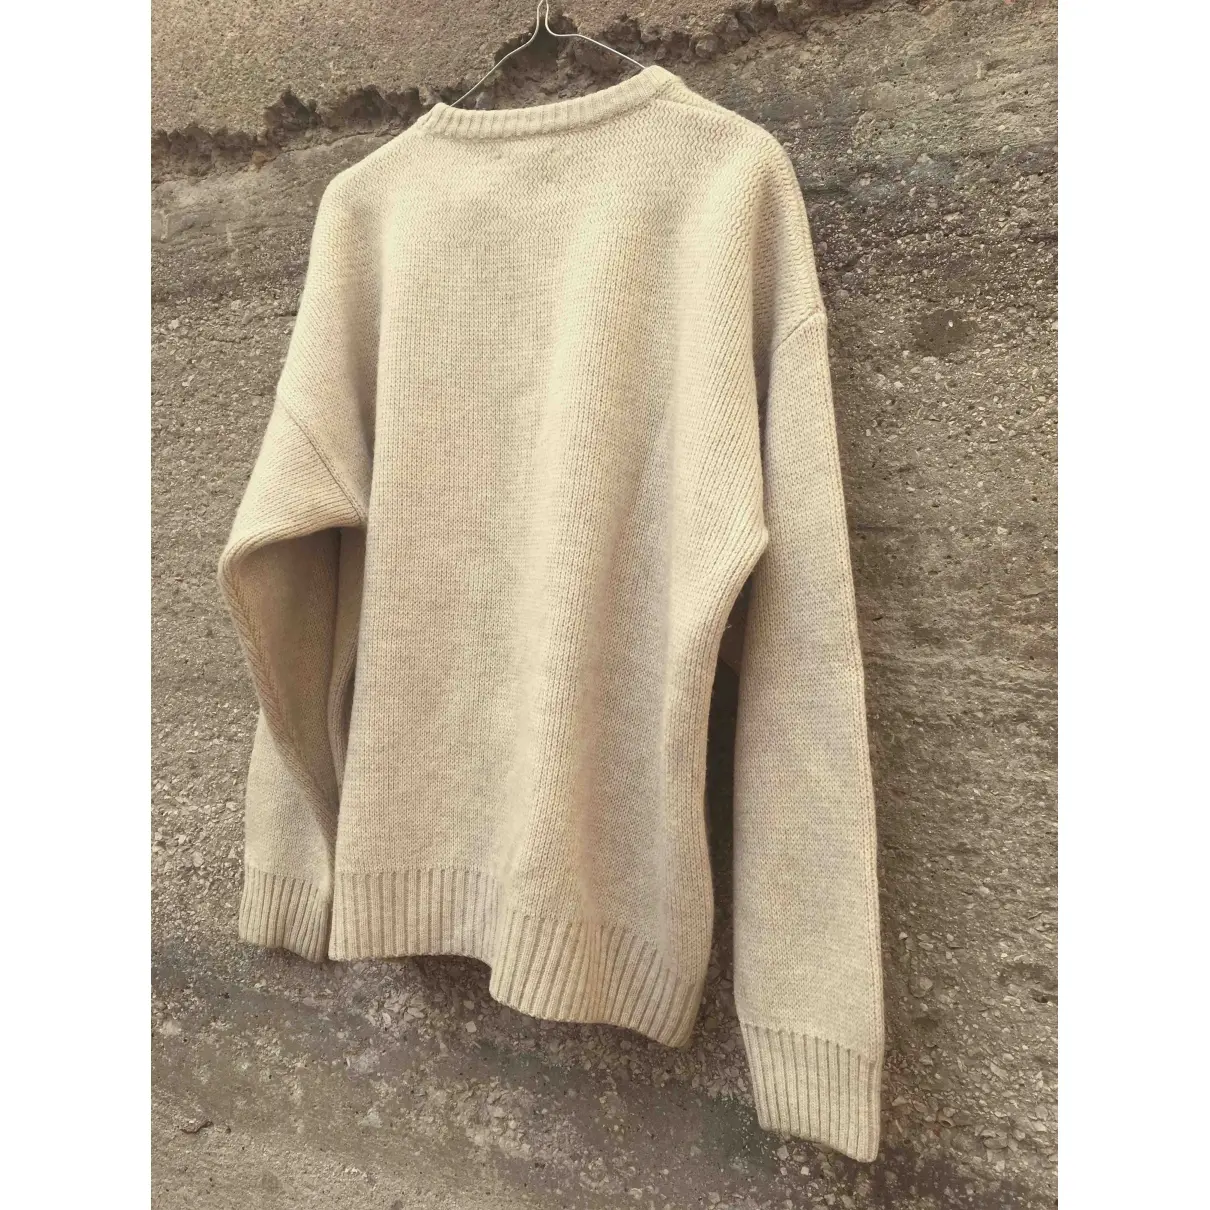 Levi's Wool pull for sale - Vintage